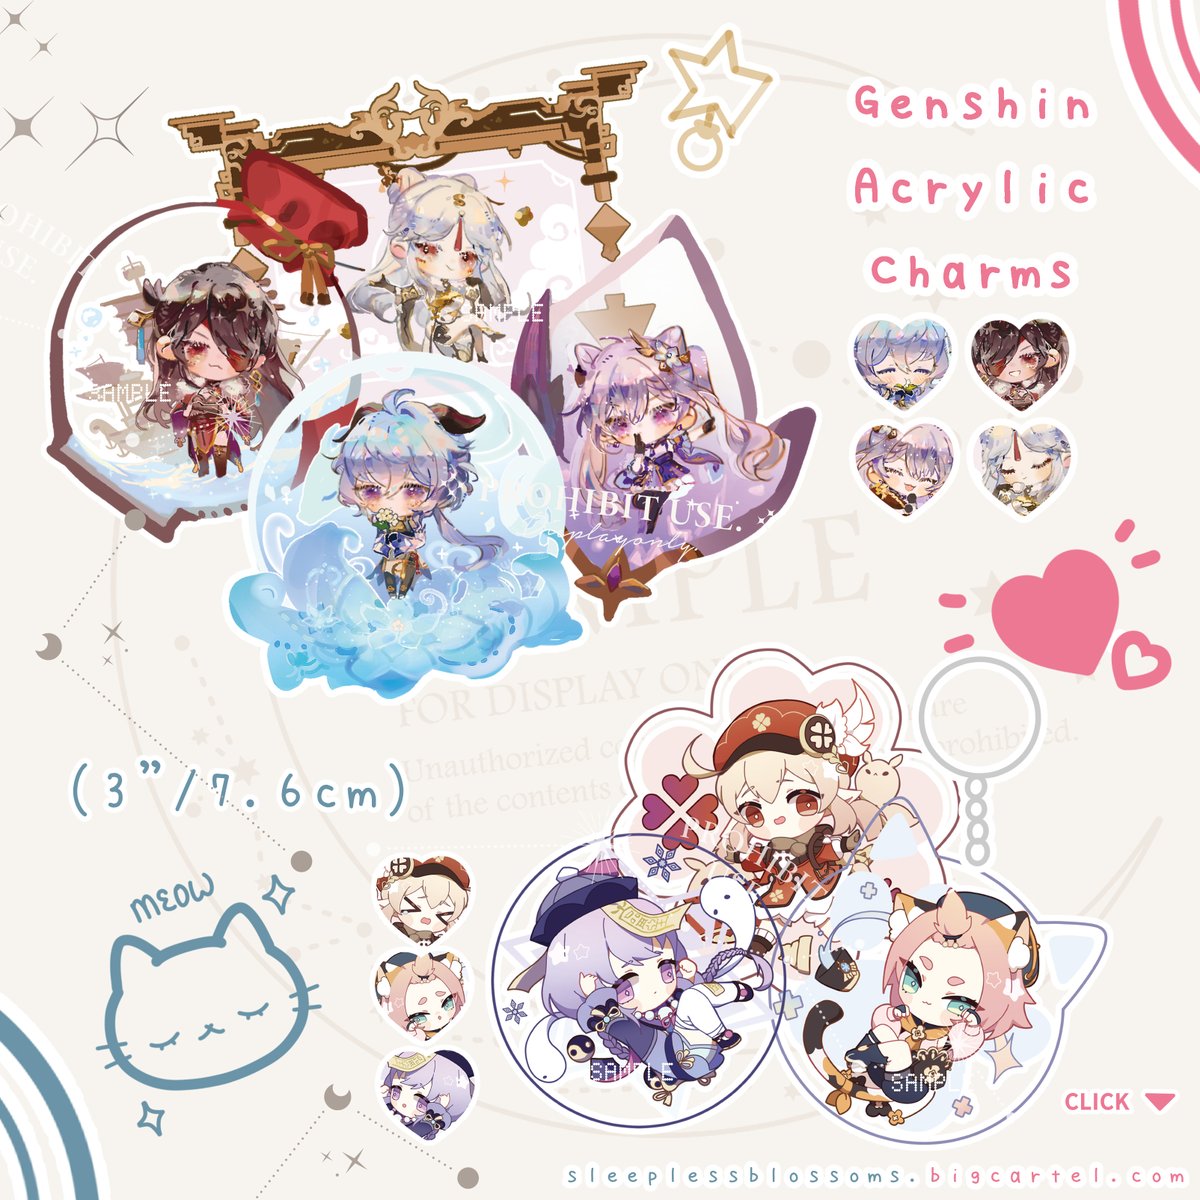 💫Genshin Impact PREORDER + GIVEAWAY💫

Preorder Link: 
🌸https://t.co/uhT6y1brxA🌸

GIVEAWAY: 
💕Retweet (QRTs do not count)
🎁Winner gets 4 charms of their choosing
✨Ends Jan 28
✈International shipping OK (excluding UK due to VAT) 

#GenshinImpact #原神 